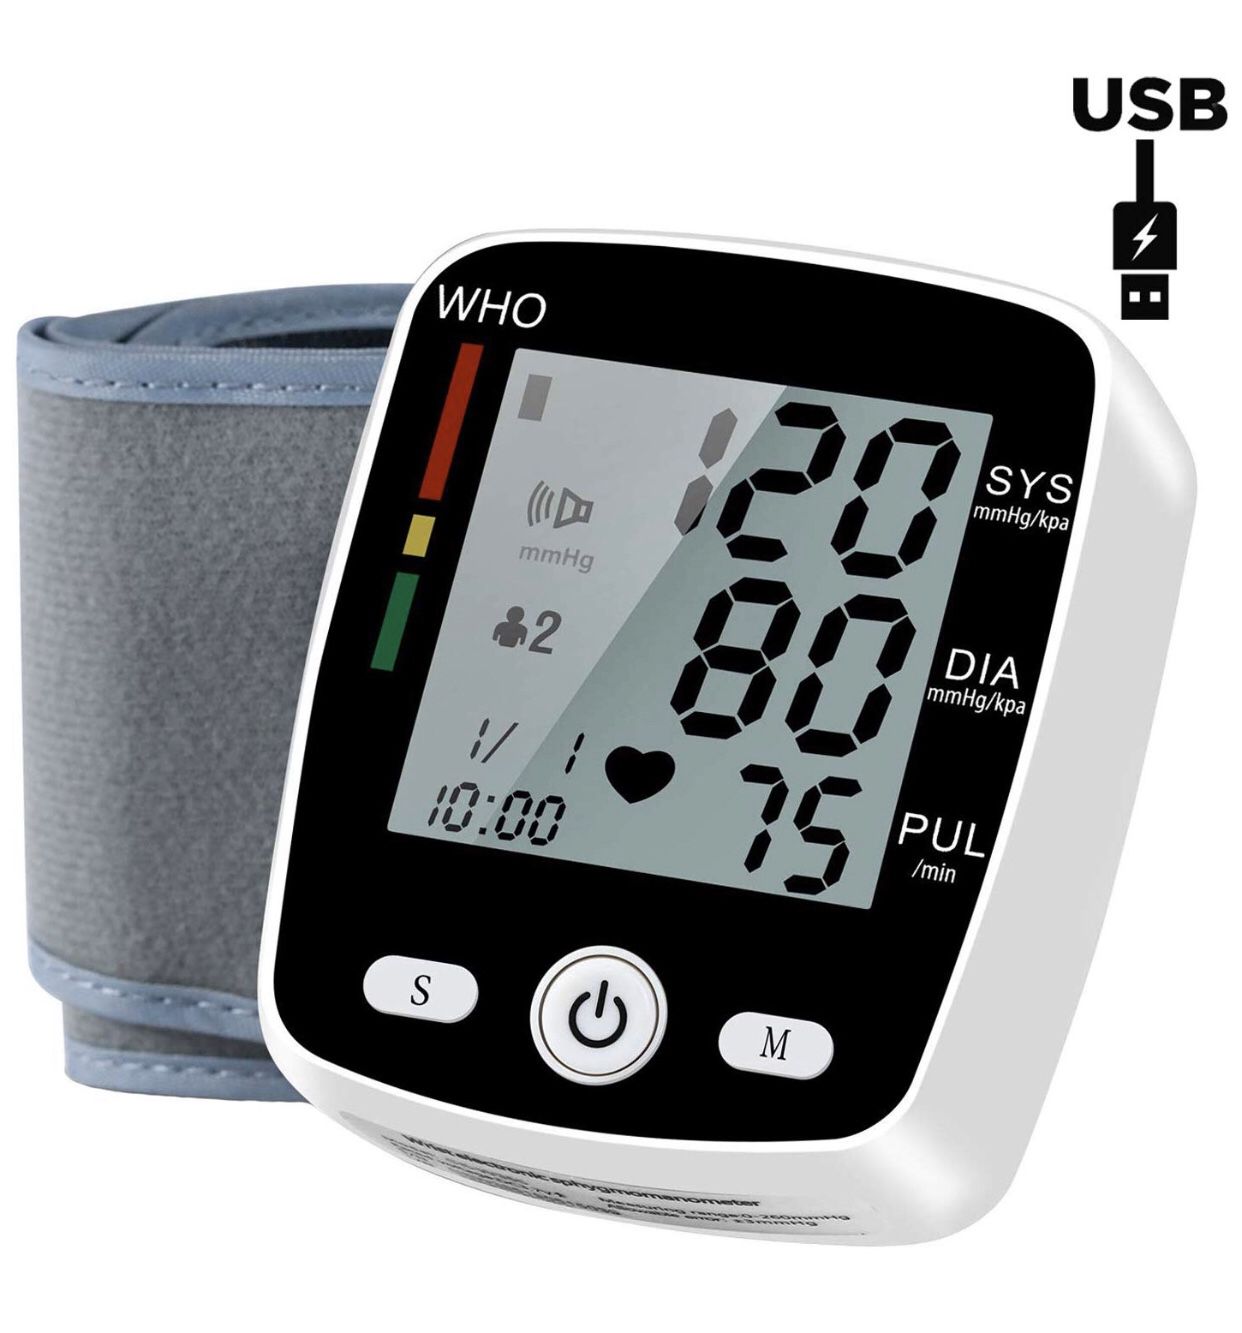 Automatic Wrist Blood Pressure Monitor with USB Charging - Blood Pressure Cuff with LCD Display - BP Monitor, BP Cuff for Detecting Irregular Heartbe